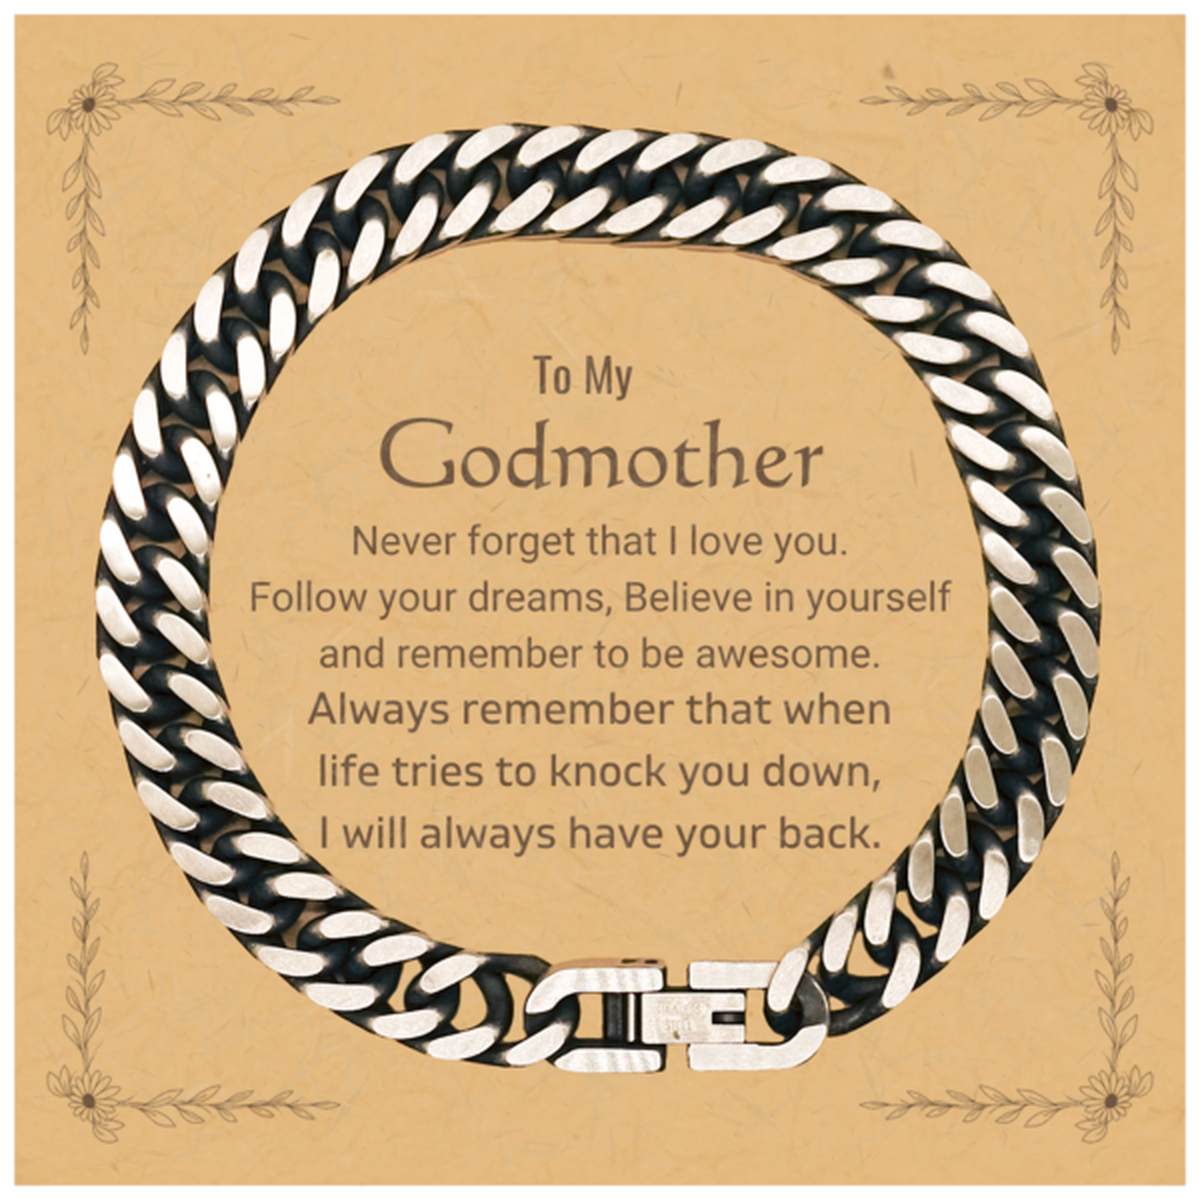 Inspirational Gifts for Godmother, Follow your dreams, Believe in yourself, Godmother Cuban Link Chain Bracelet, Birthday Christmas Unique Gifts For Godmother